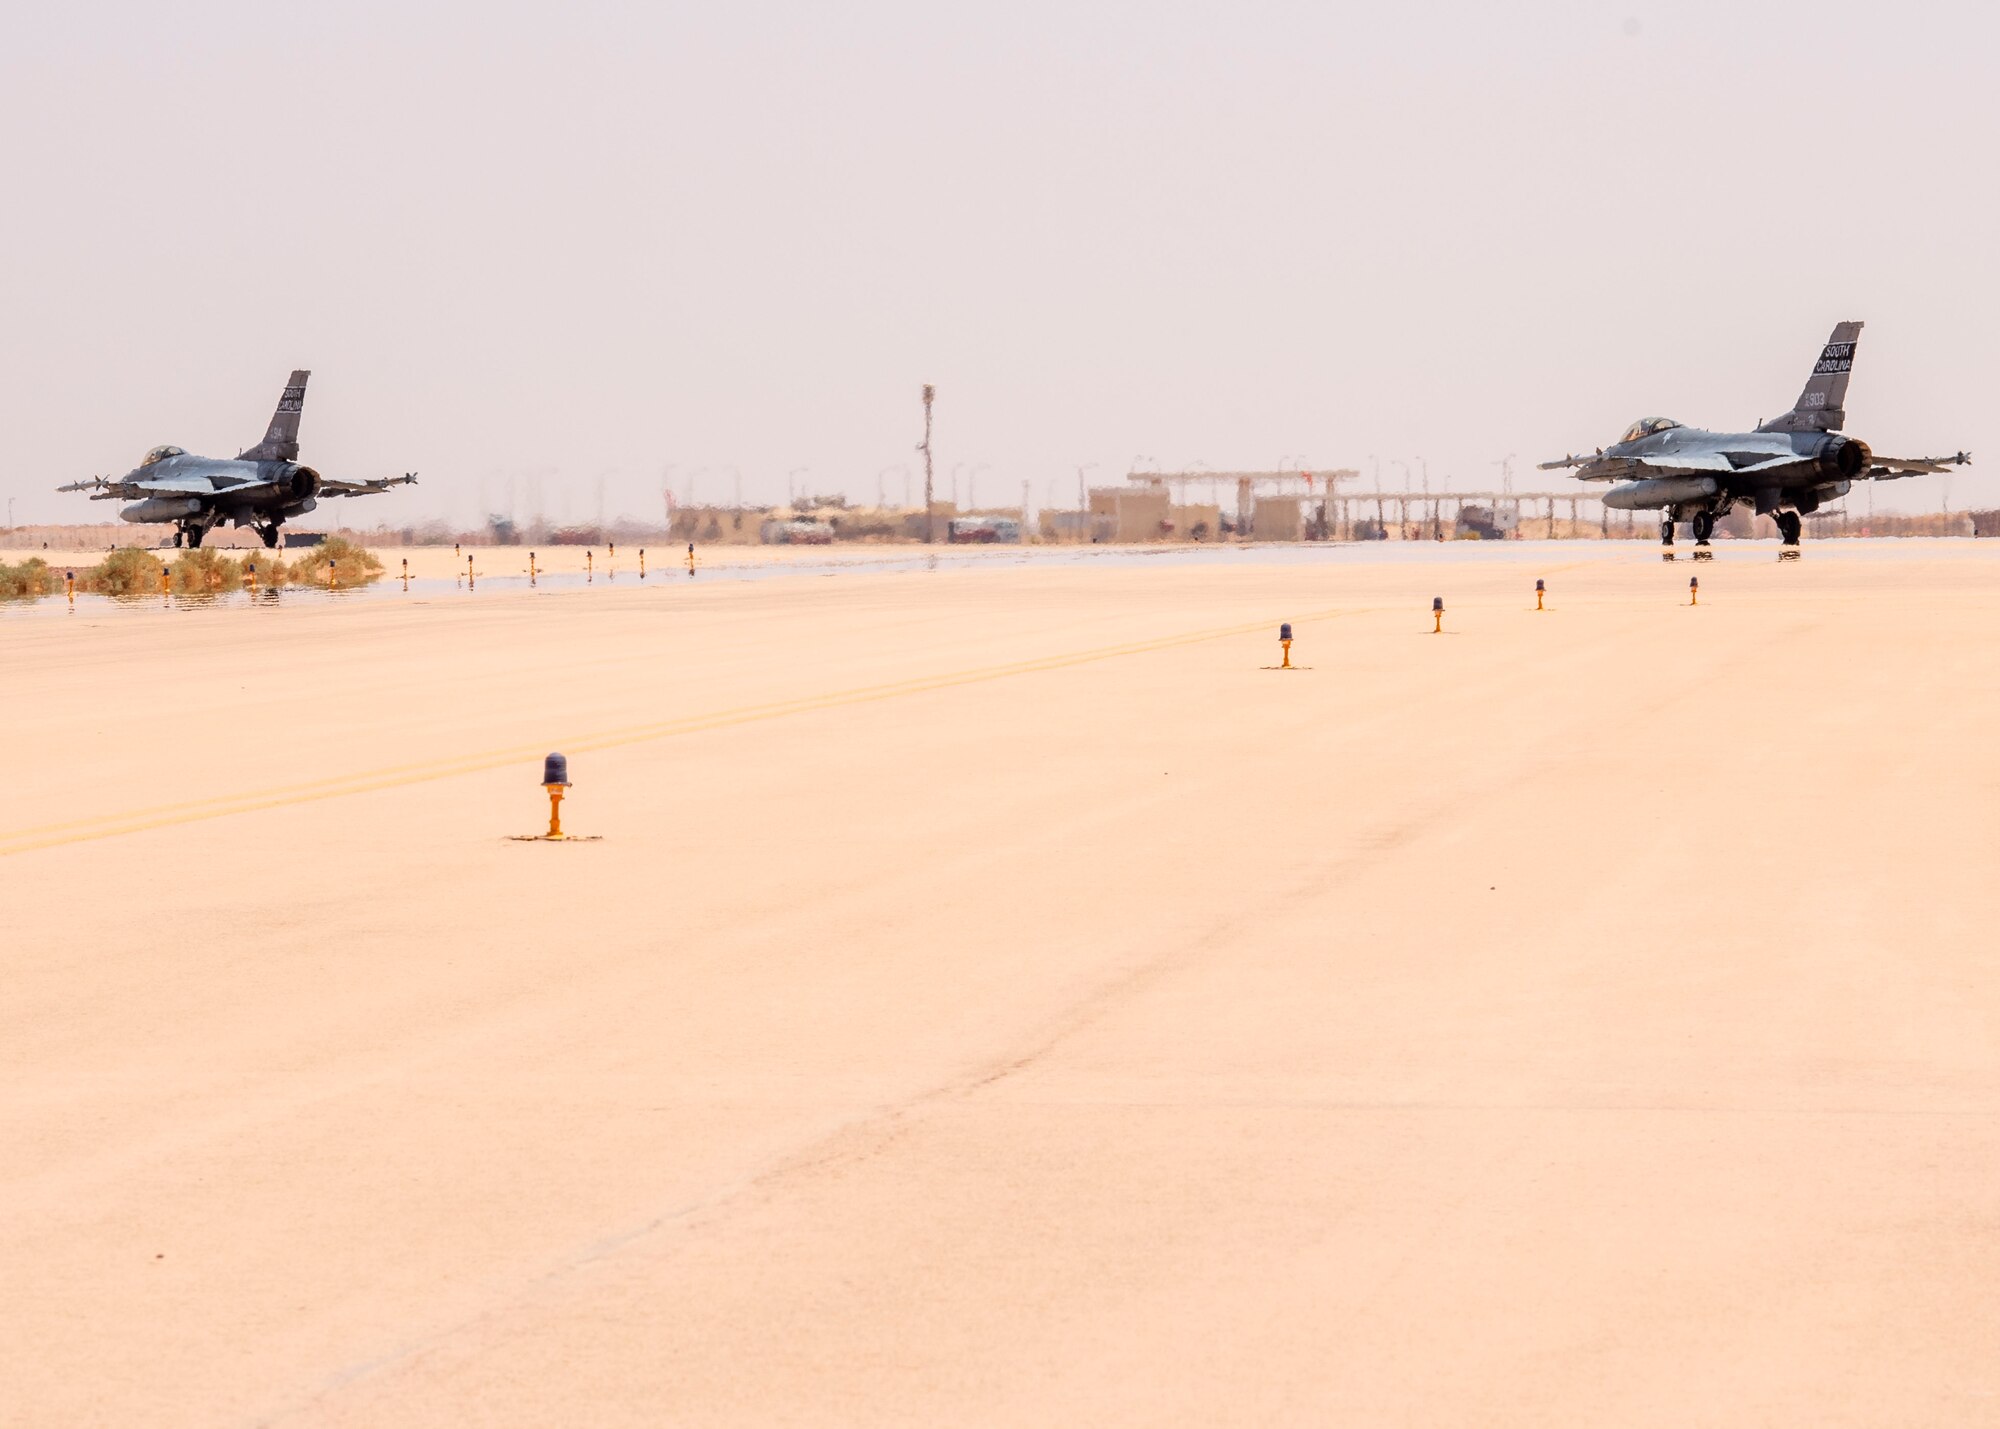 Two U.S. Air Force F-16 Fighting Falcons taxi on a runway at Prince Sultan Air Base, Kingdom of Saudi Arabia, while preparing to take part in a counter unmanned aerial system integration mission with joint and Royal Saudi aircraft, June 30, 2021. U.S. Air Forces Central aircraft regularly work with coalition and partner nations to test their collective counter-UAS capabilities to ensure the security and stability of regional airspace.  (U.S. Air Force photo by Technical Sgt. Veronica Woodward)